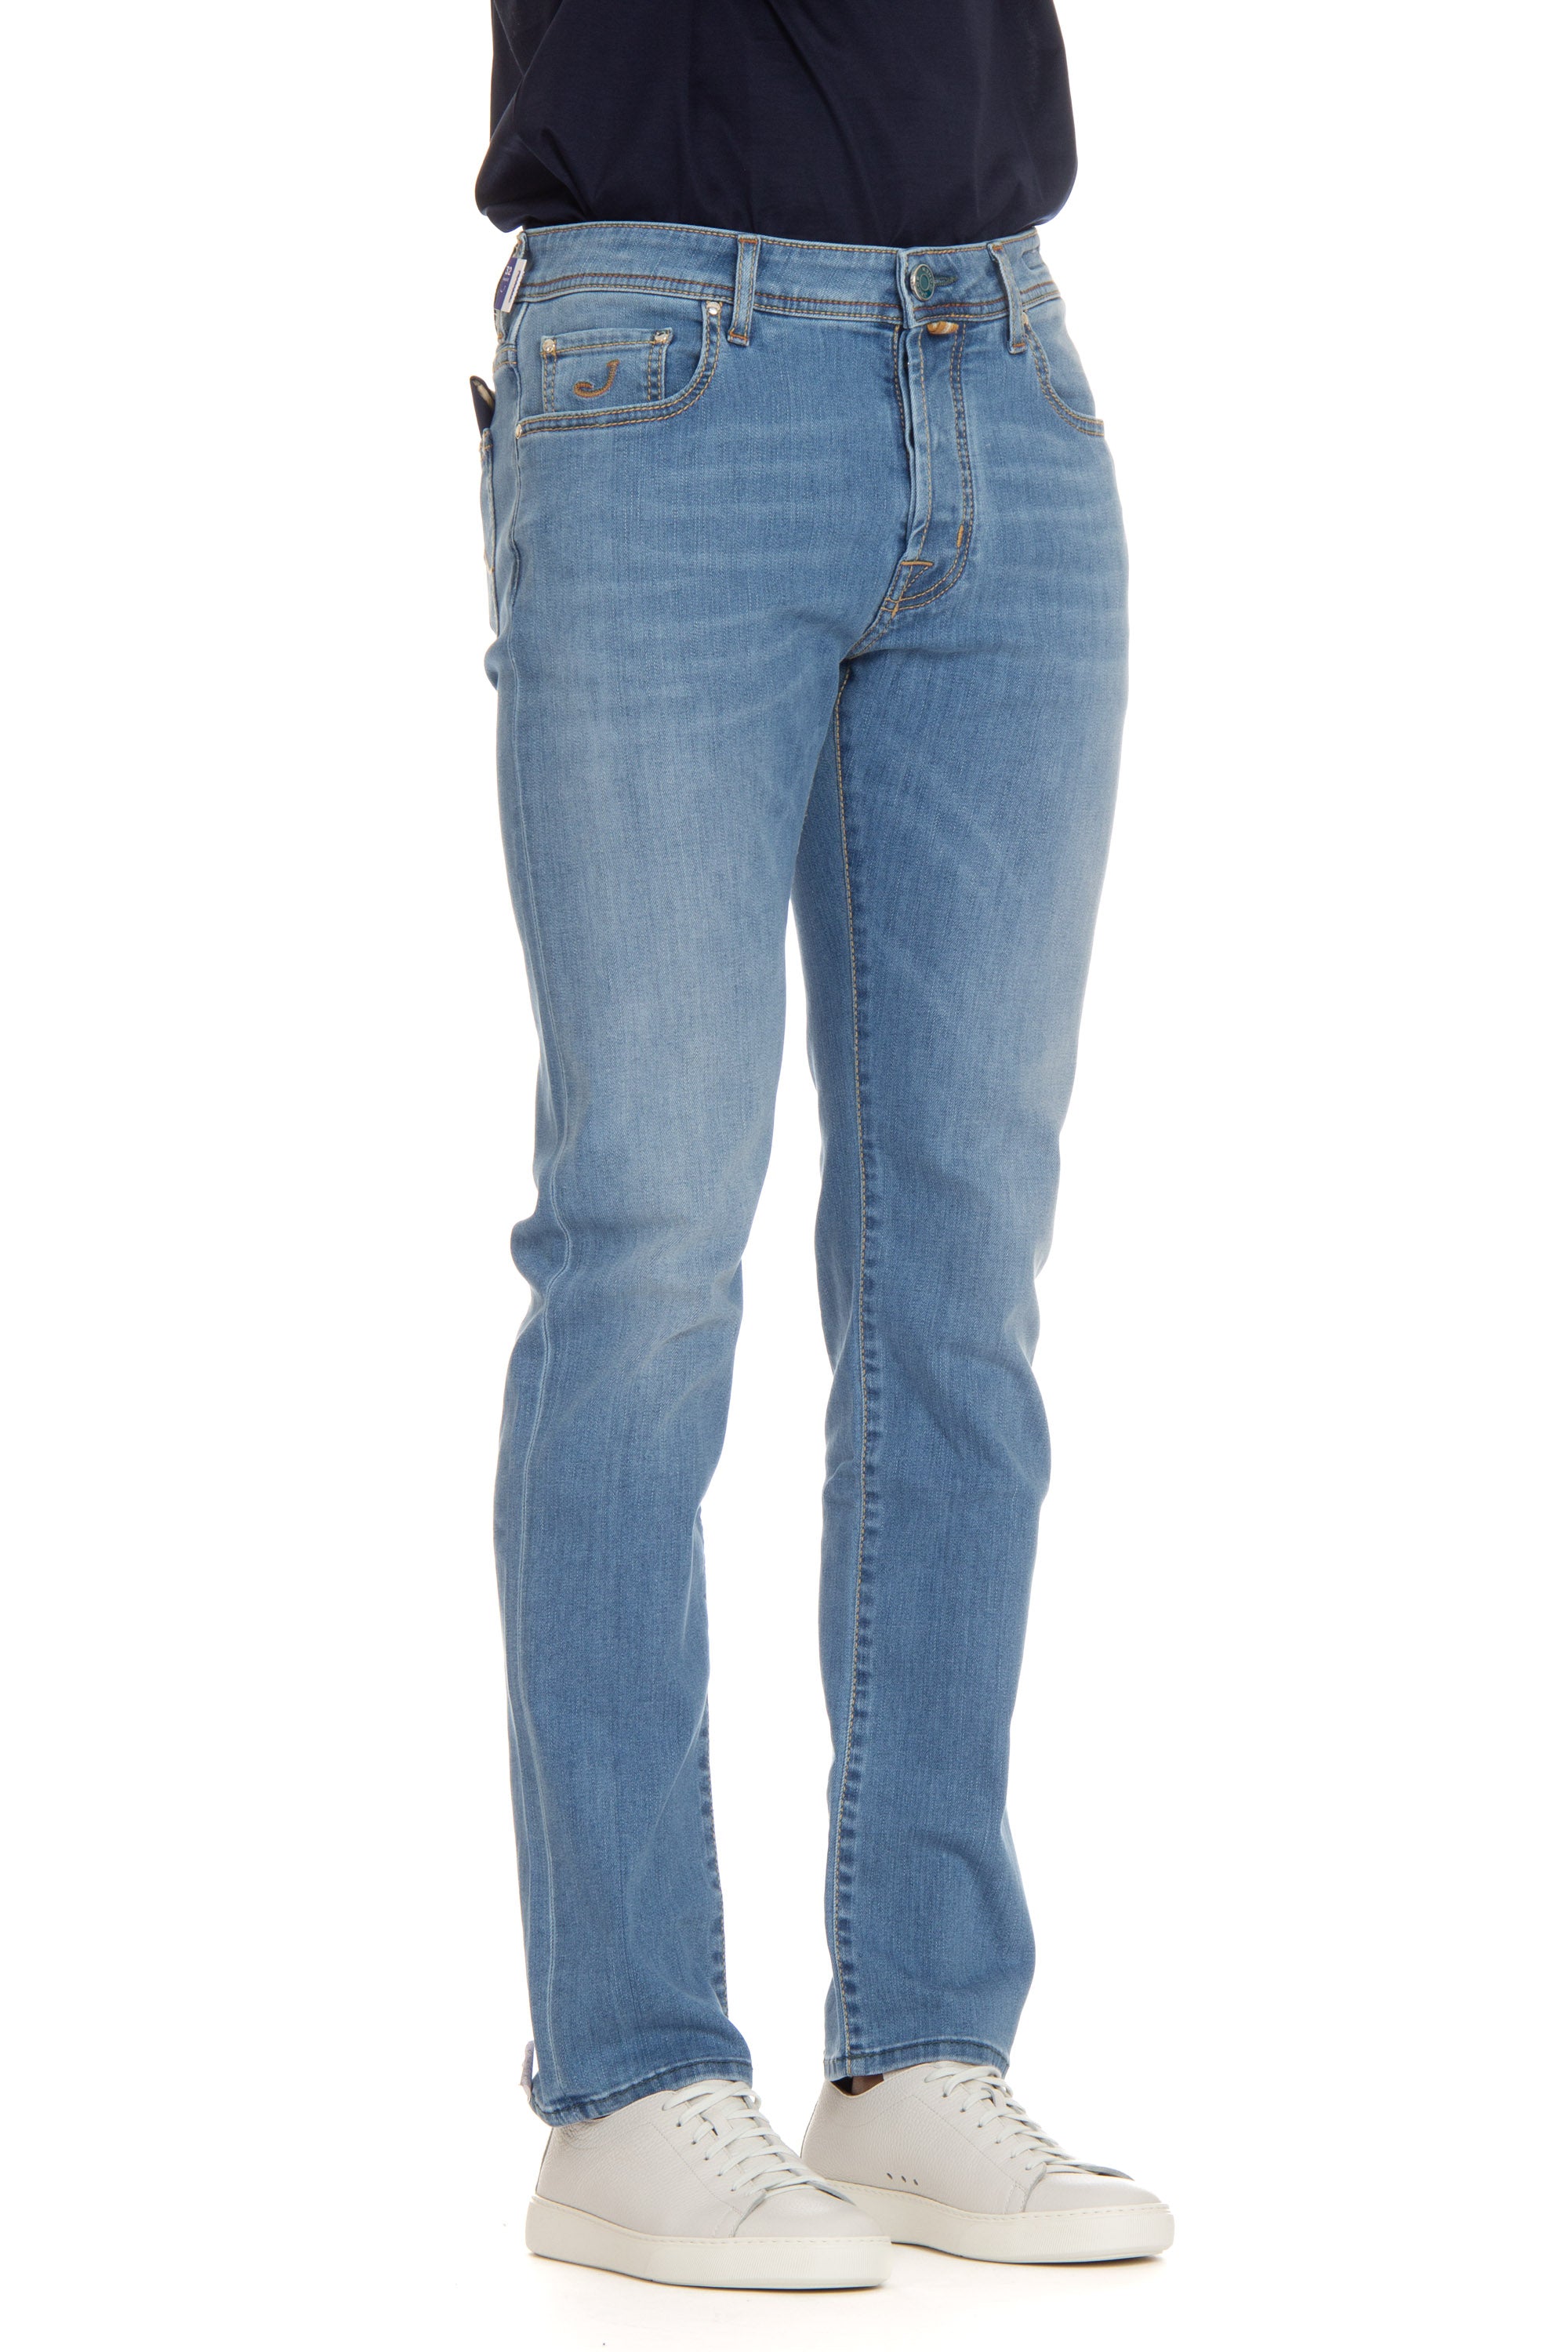 Green label stretch jeans in Bard fit pony hair